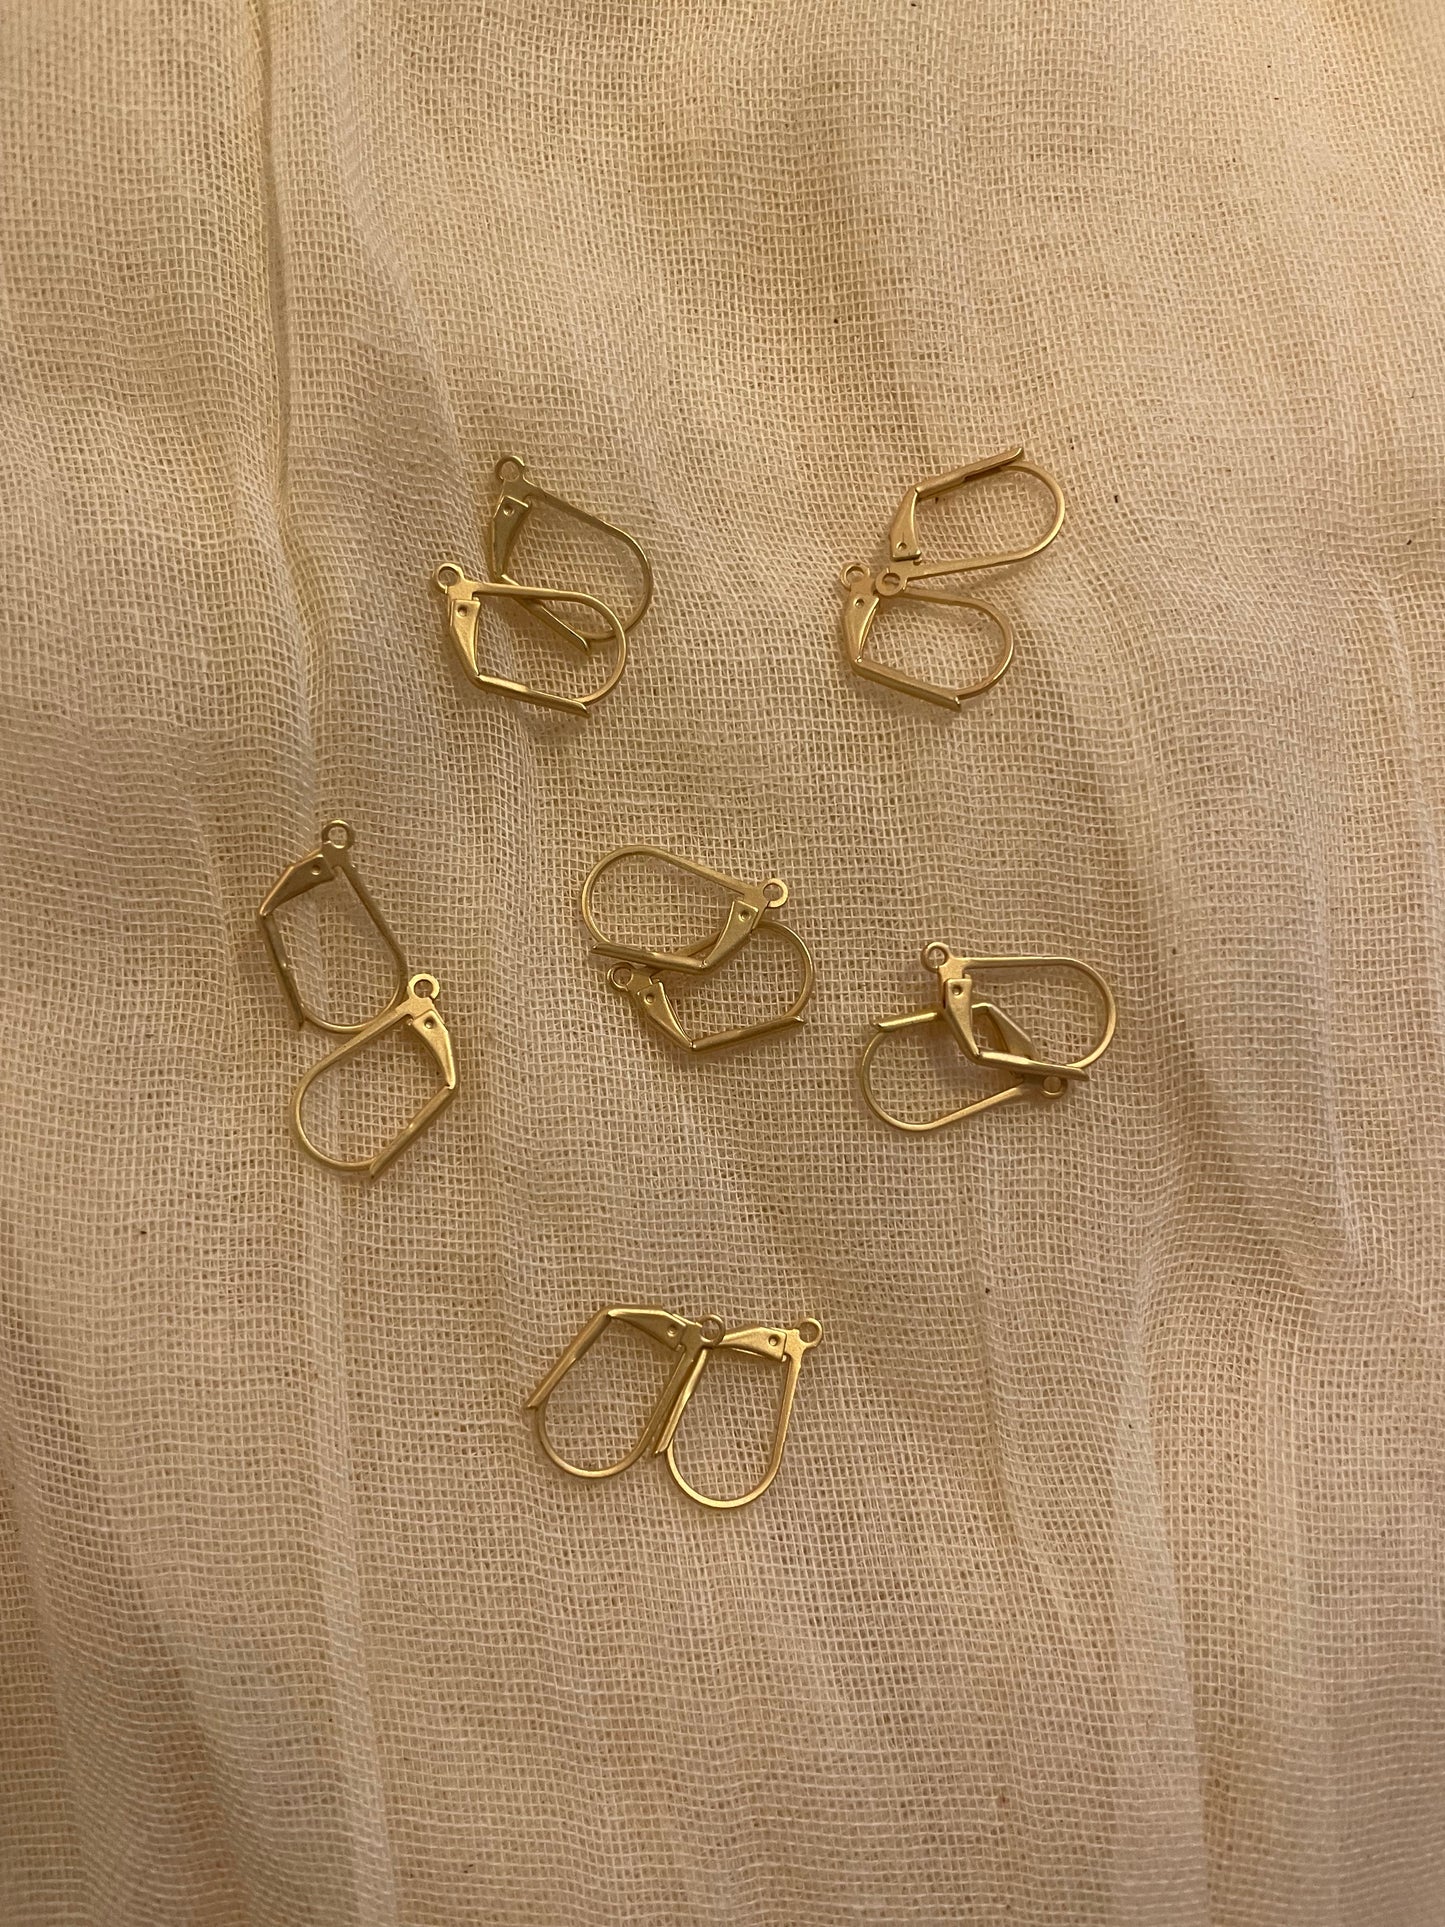 Matte Gold Plated Leverback Earrings 17mm x 10mm 6 Pairs